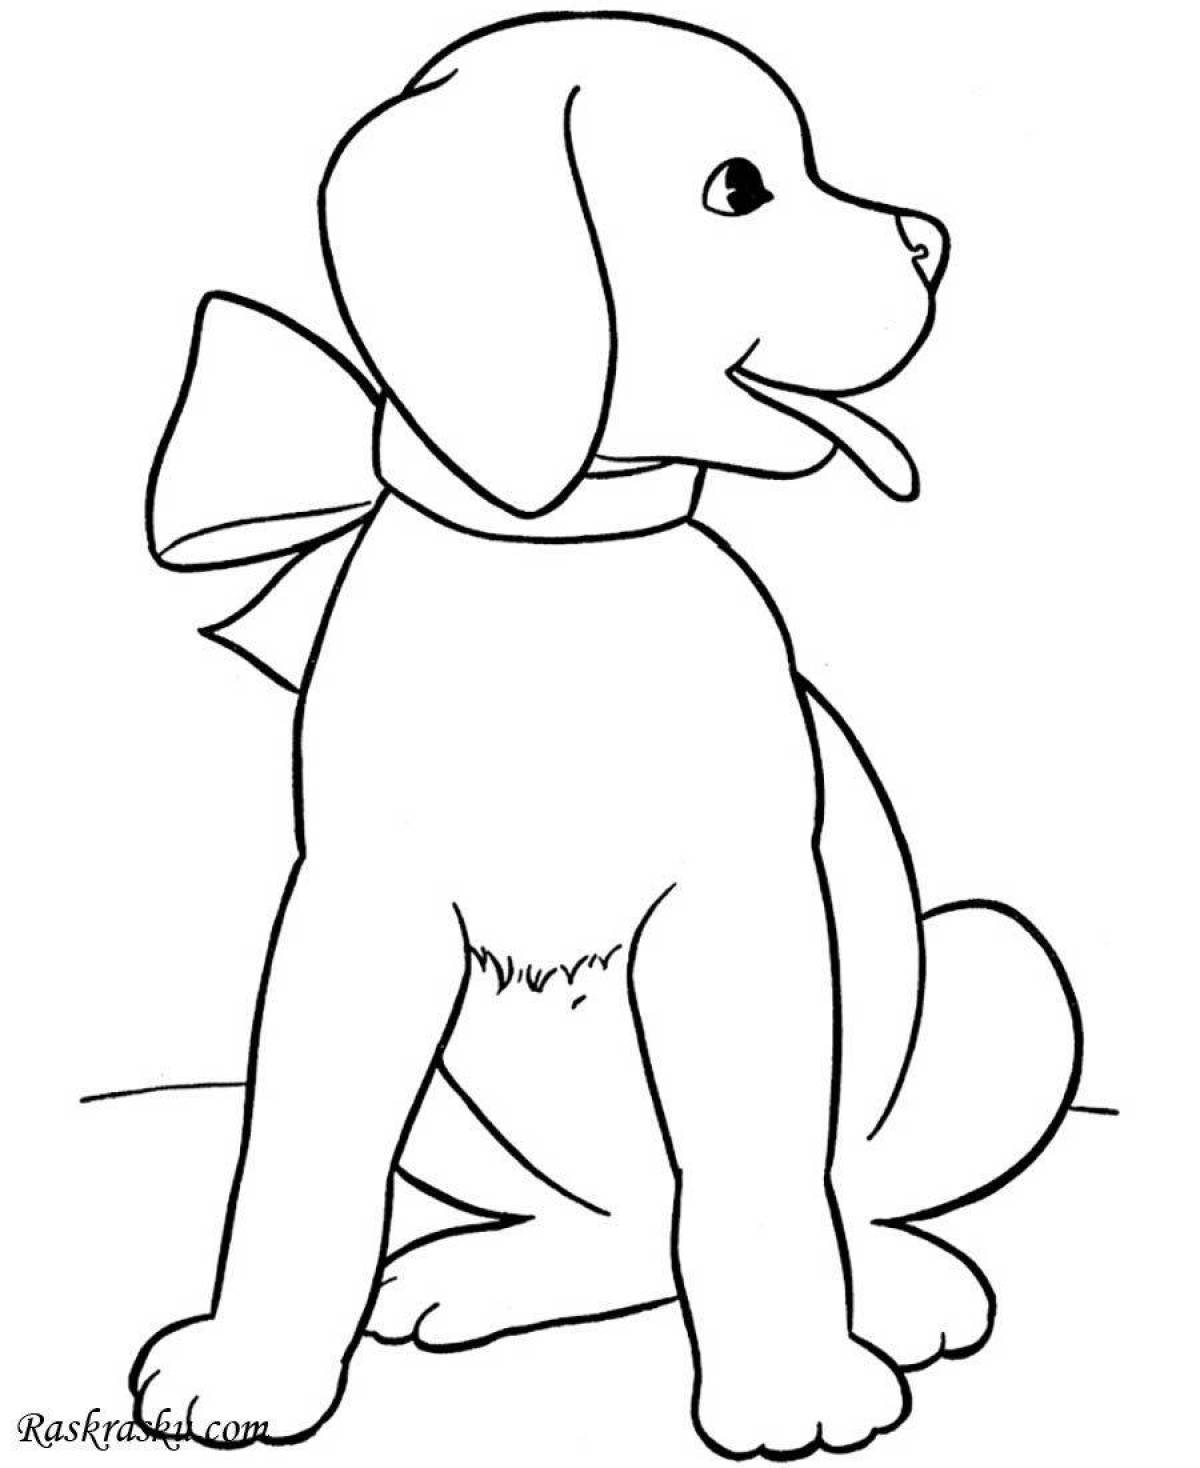 Colorful dog coloring book for kids 6-7 years old